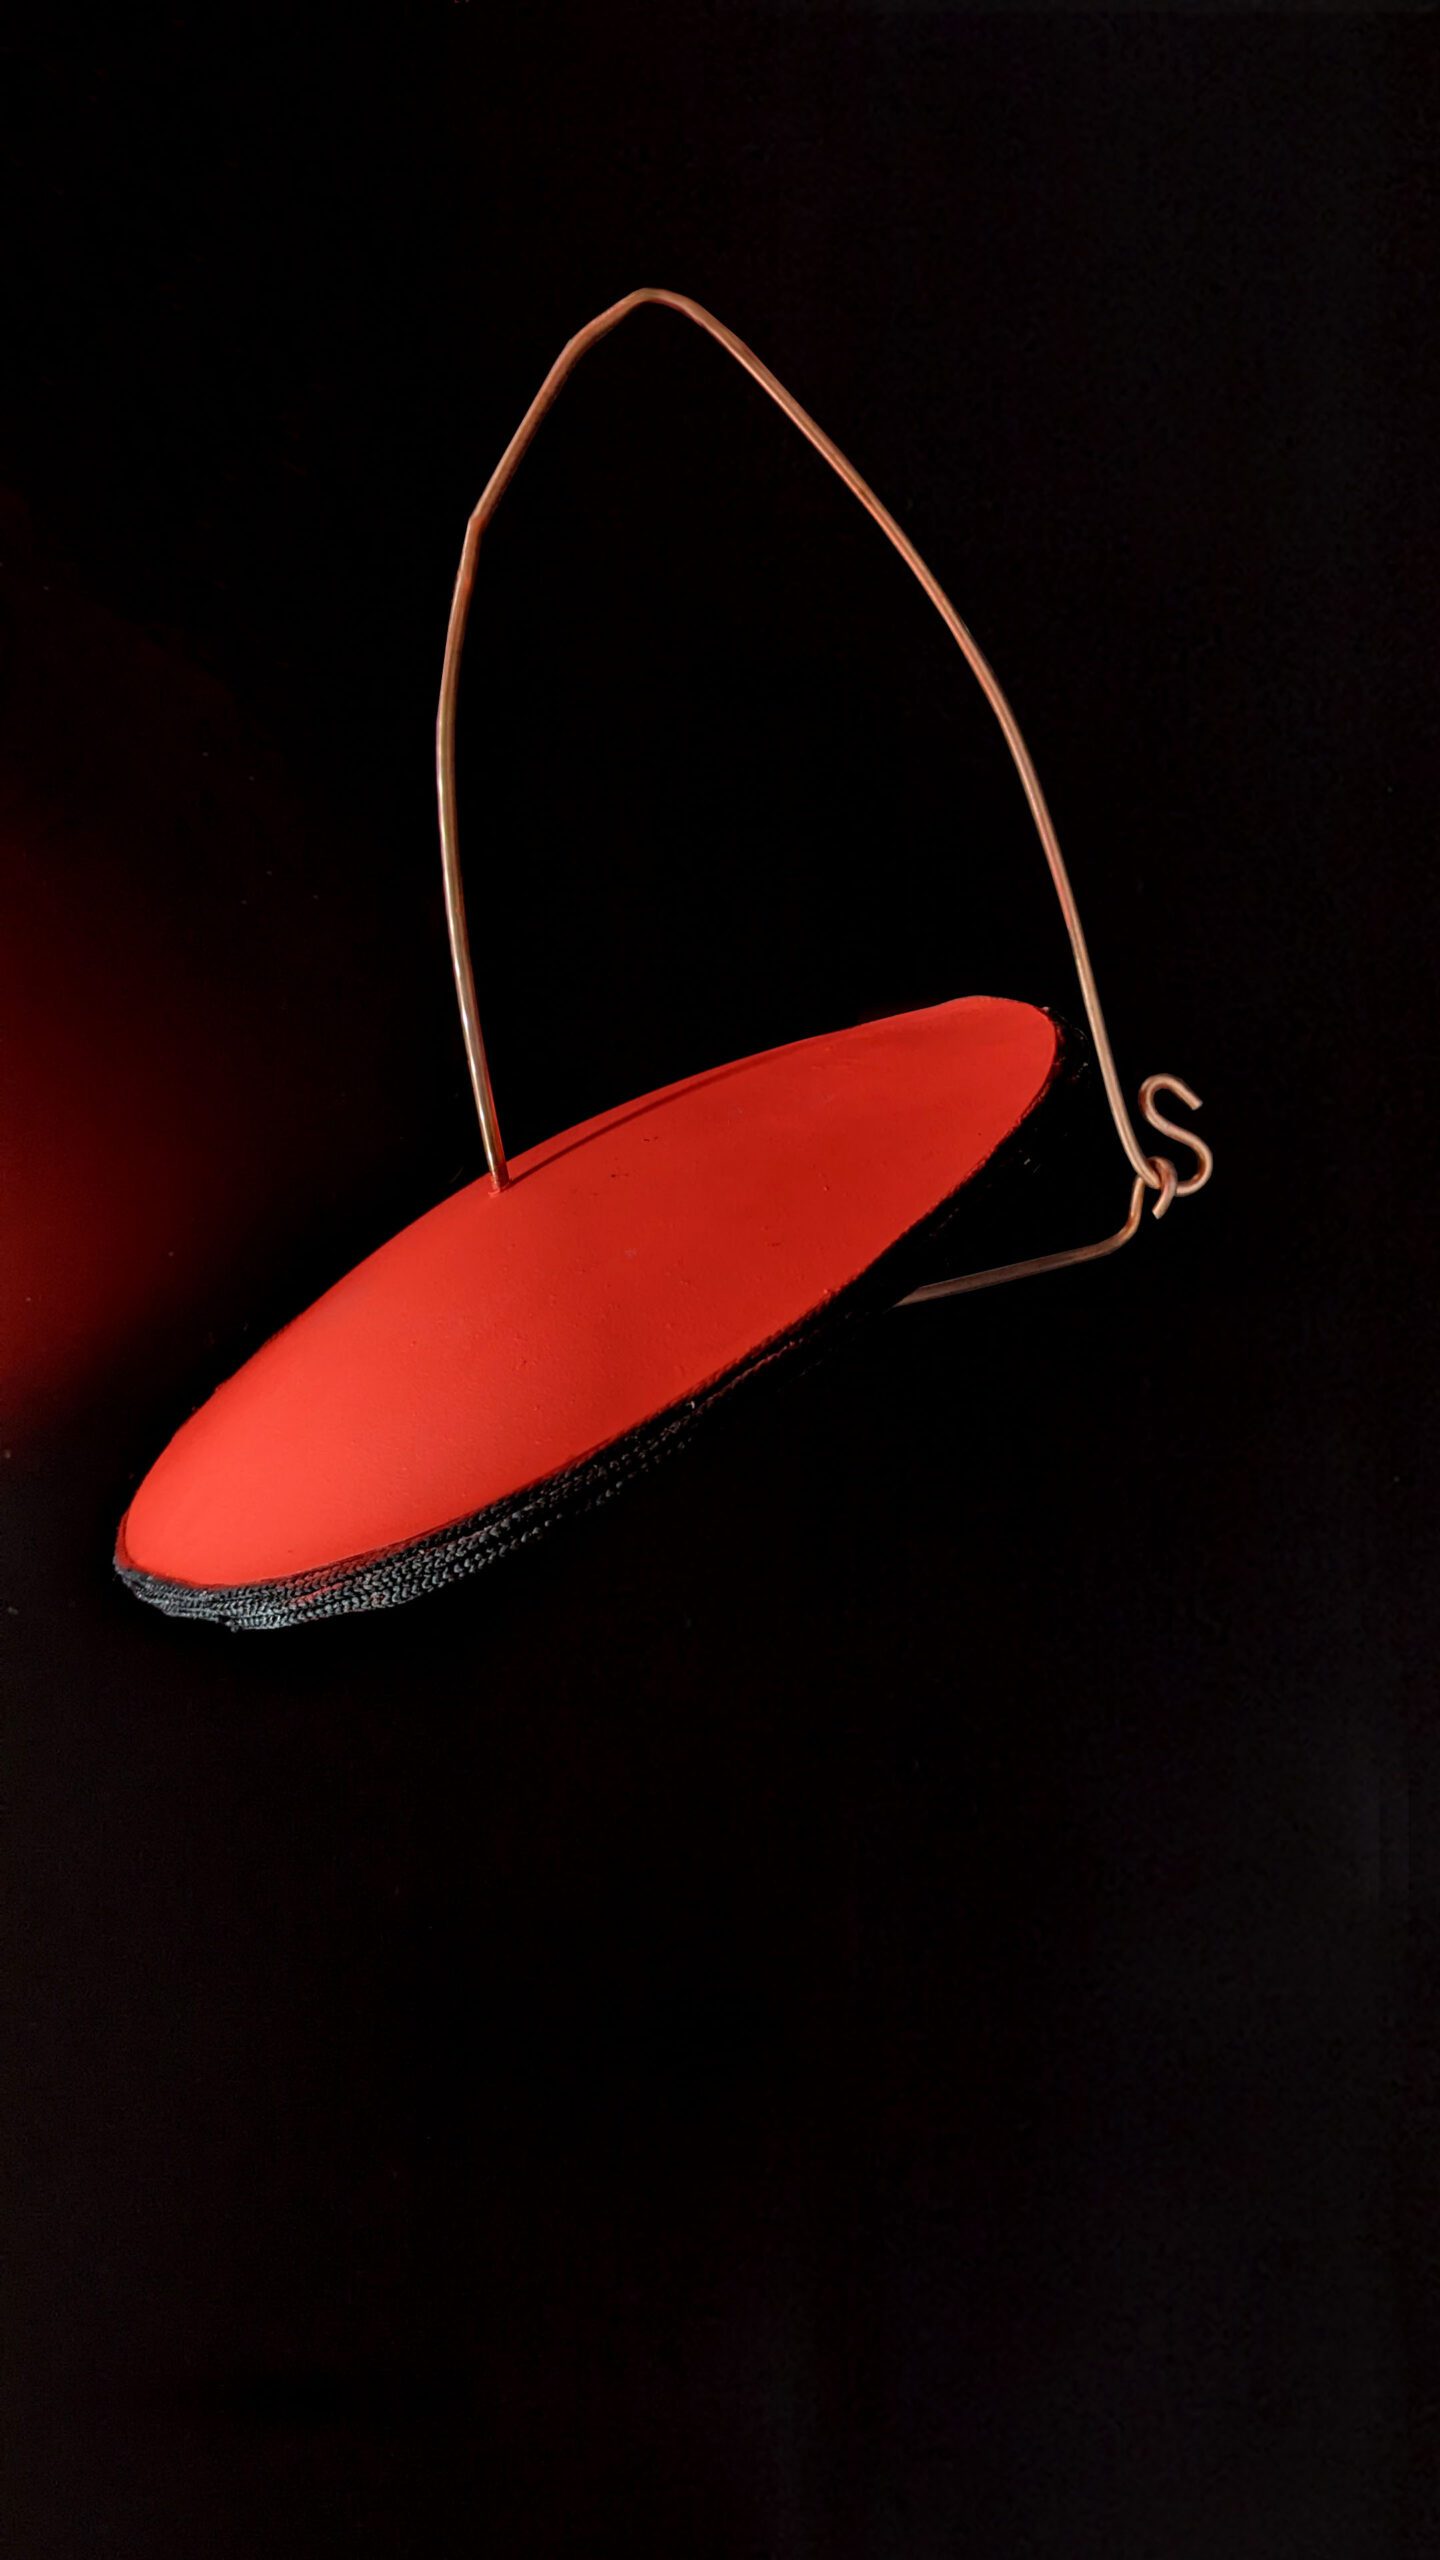 A UFO-like shape in neon orange/pink with a black corded edge, suspended from nothing by a steel wire frame on a black background.